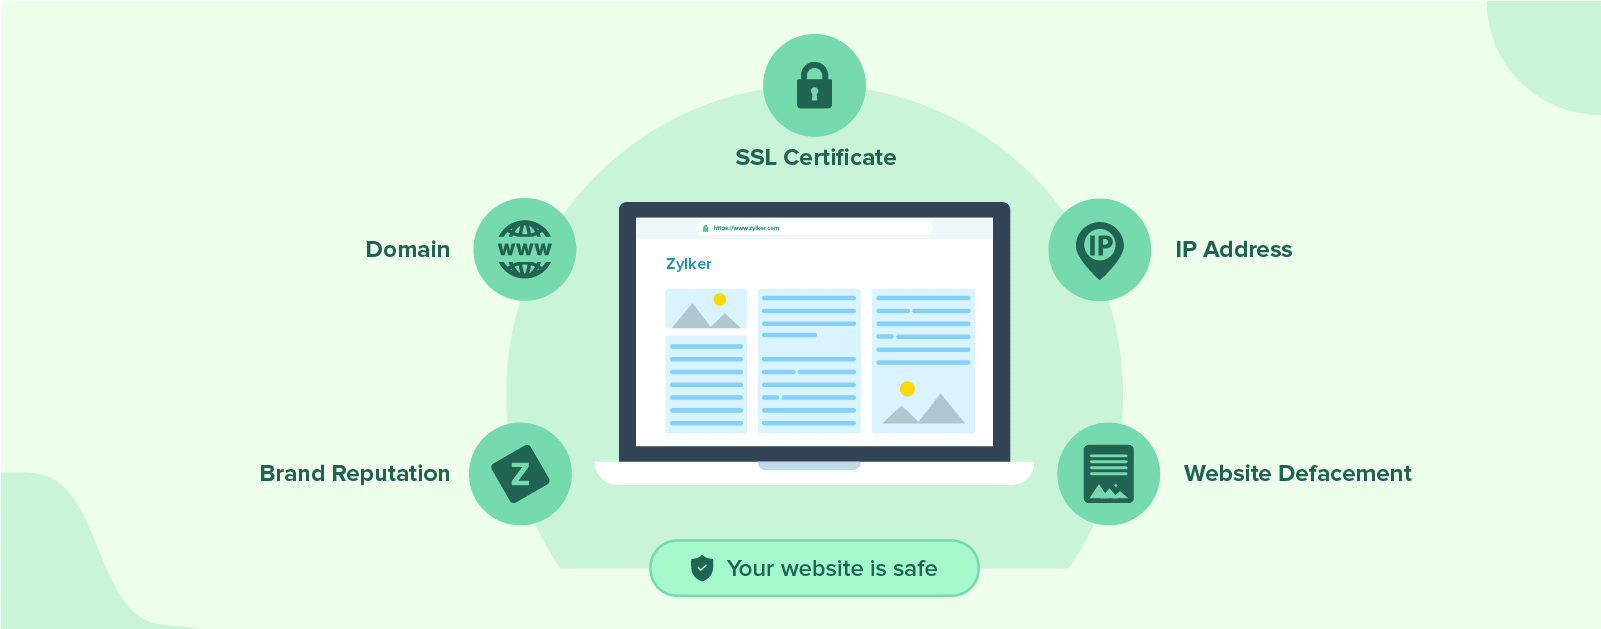 Guidelines to make your website secure